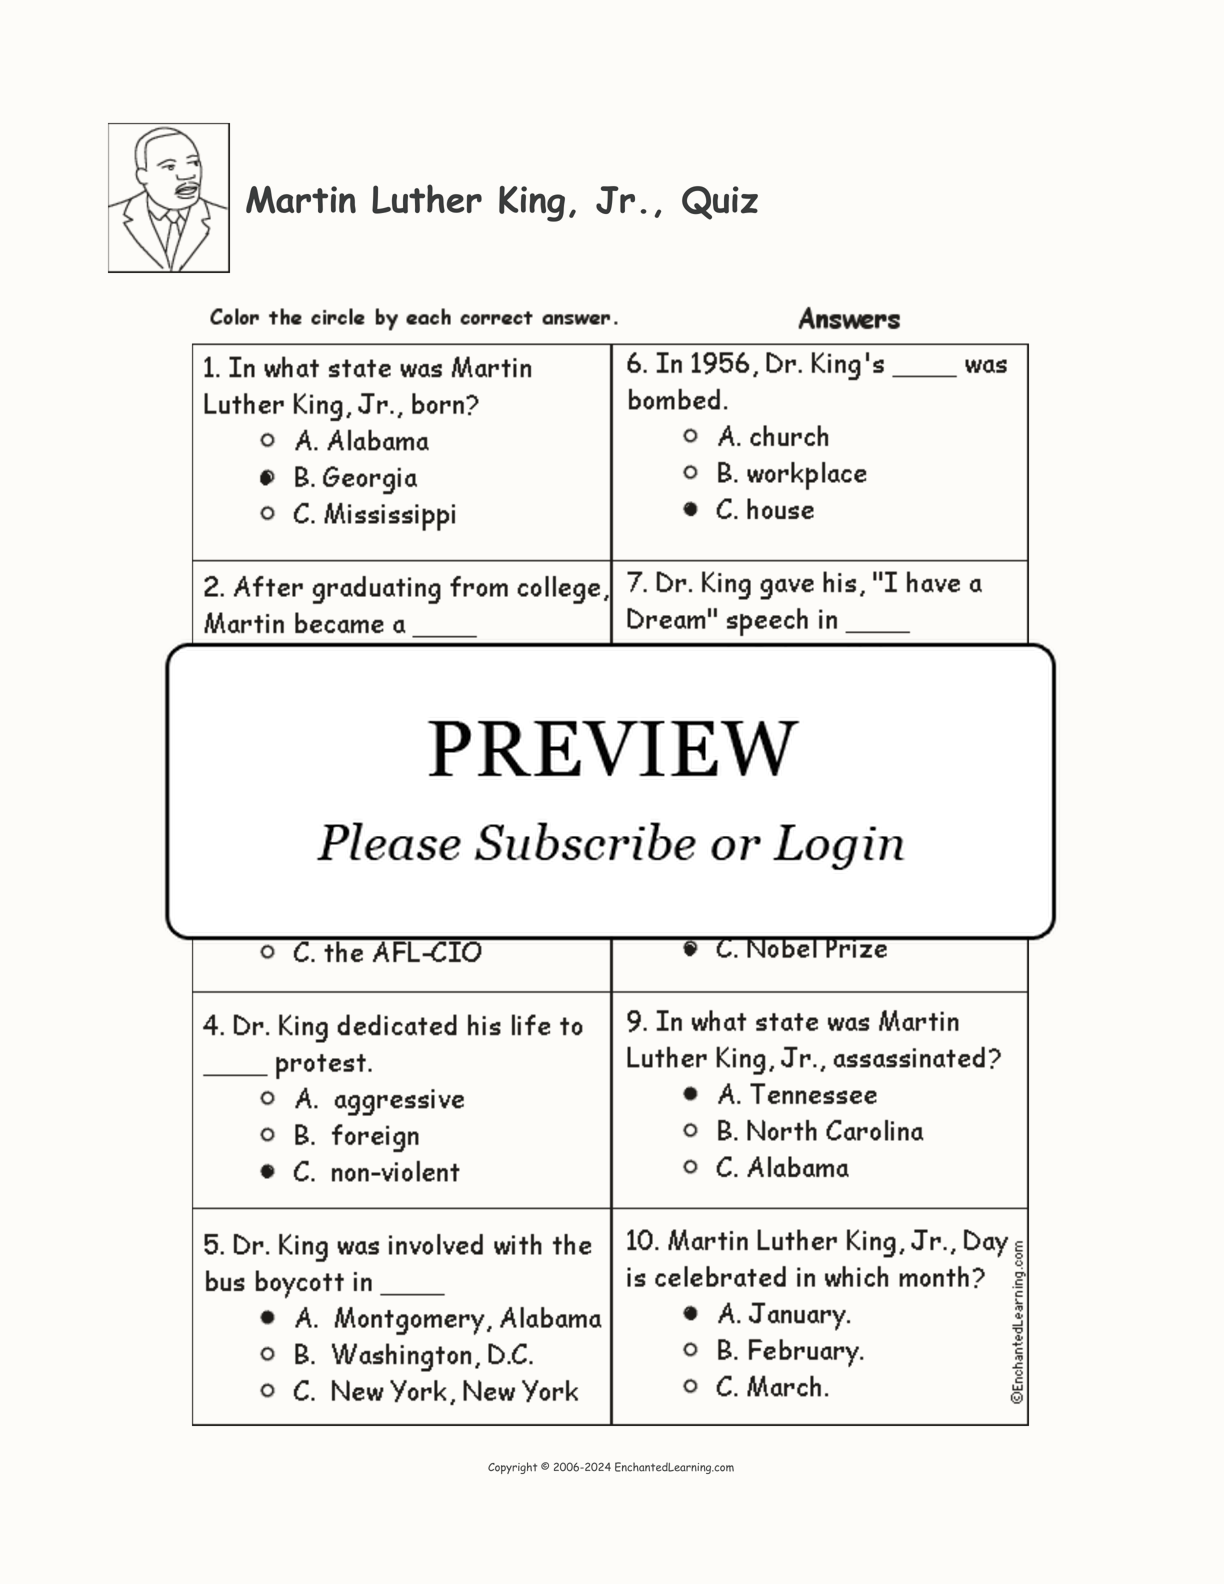 Martin Luther King, Jr., Quiz interactive worksheet page 2